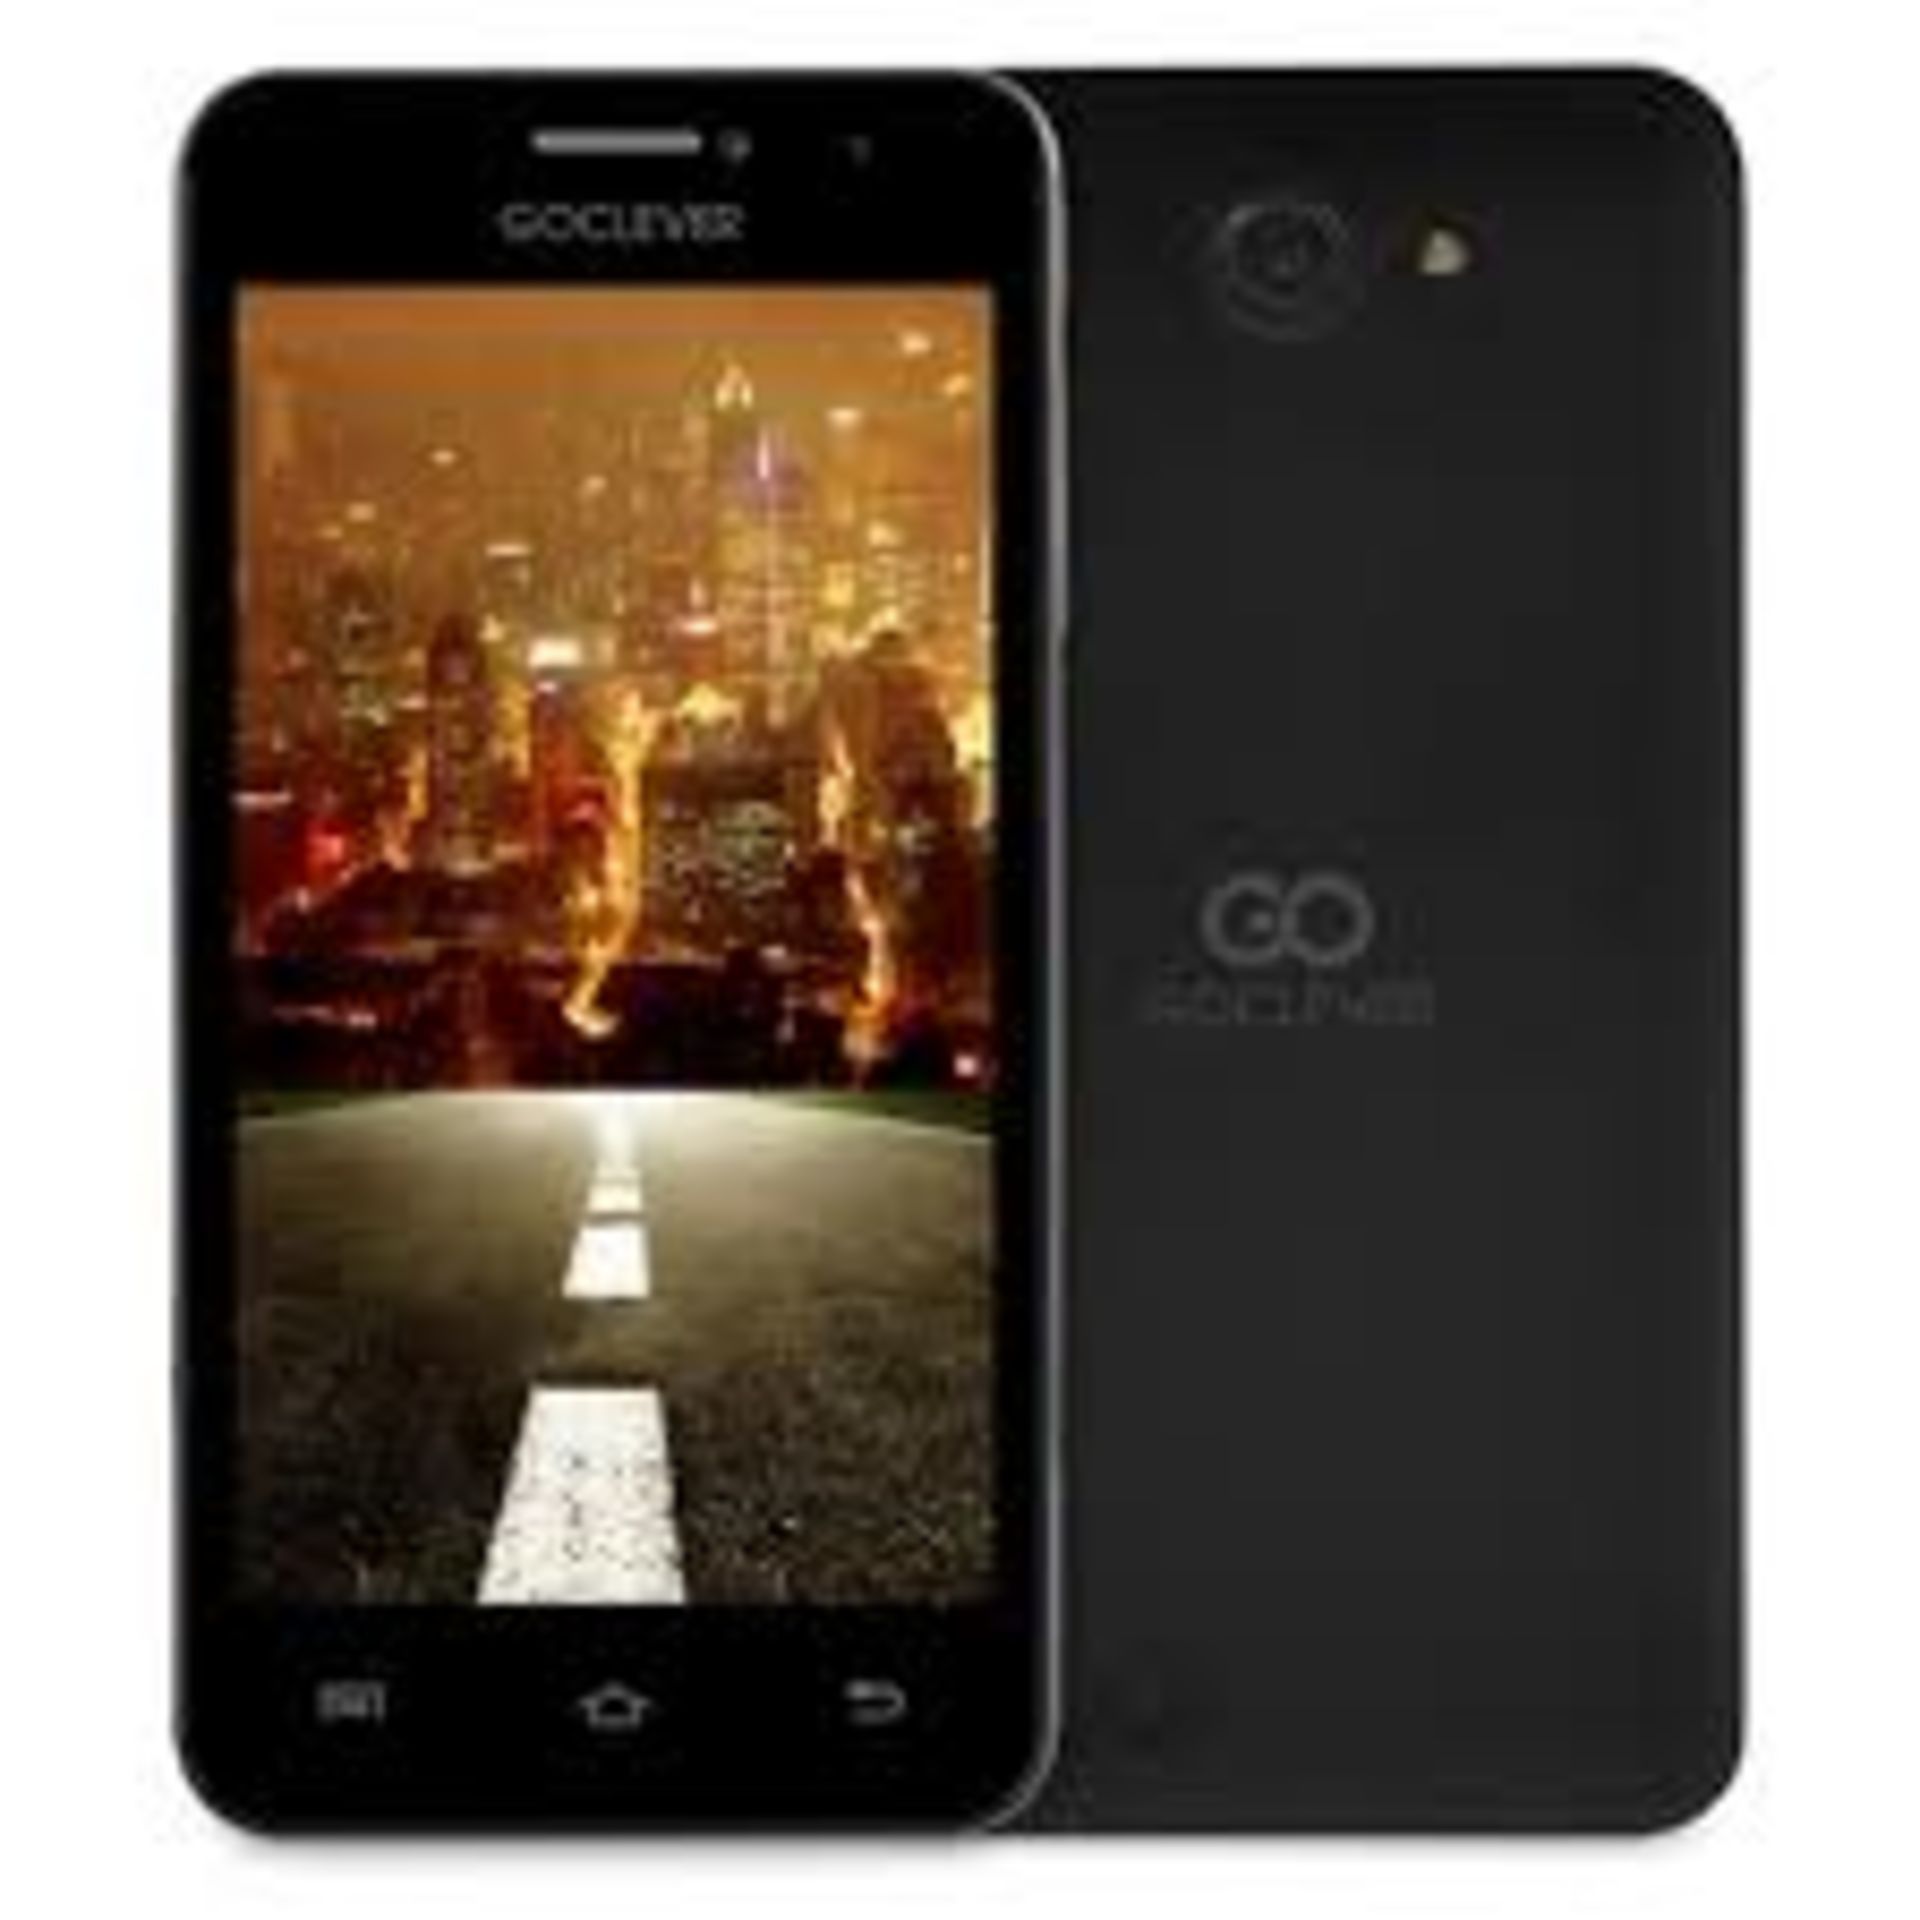 V NEW GOCLEVER FONE 500 - 5" WVGA - ANDROID - DUAL CORE A9 - DUAL SIM - 2 CAMERAS - BT